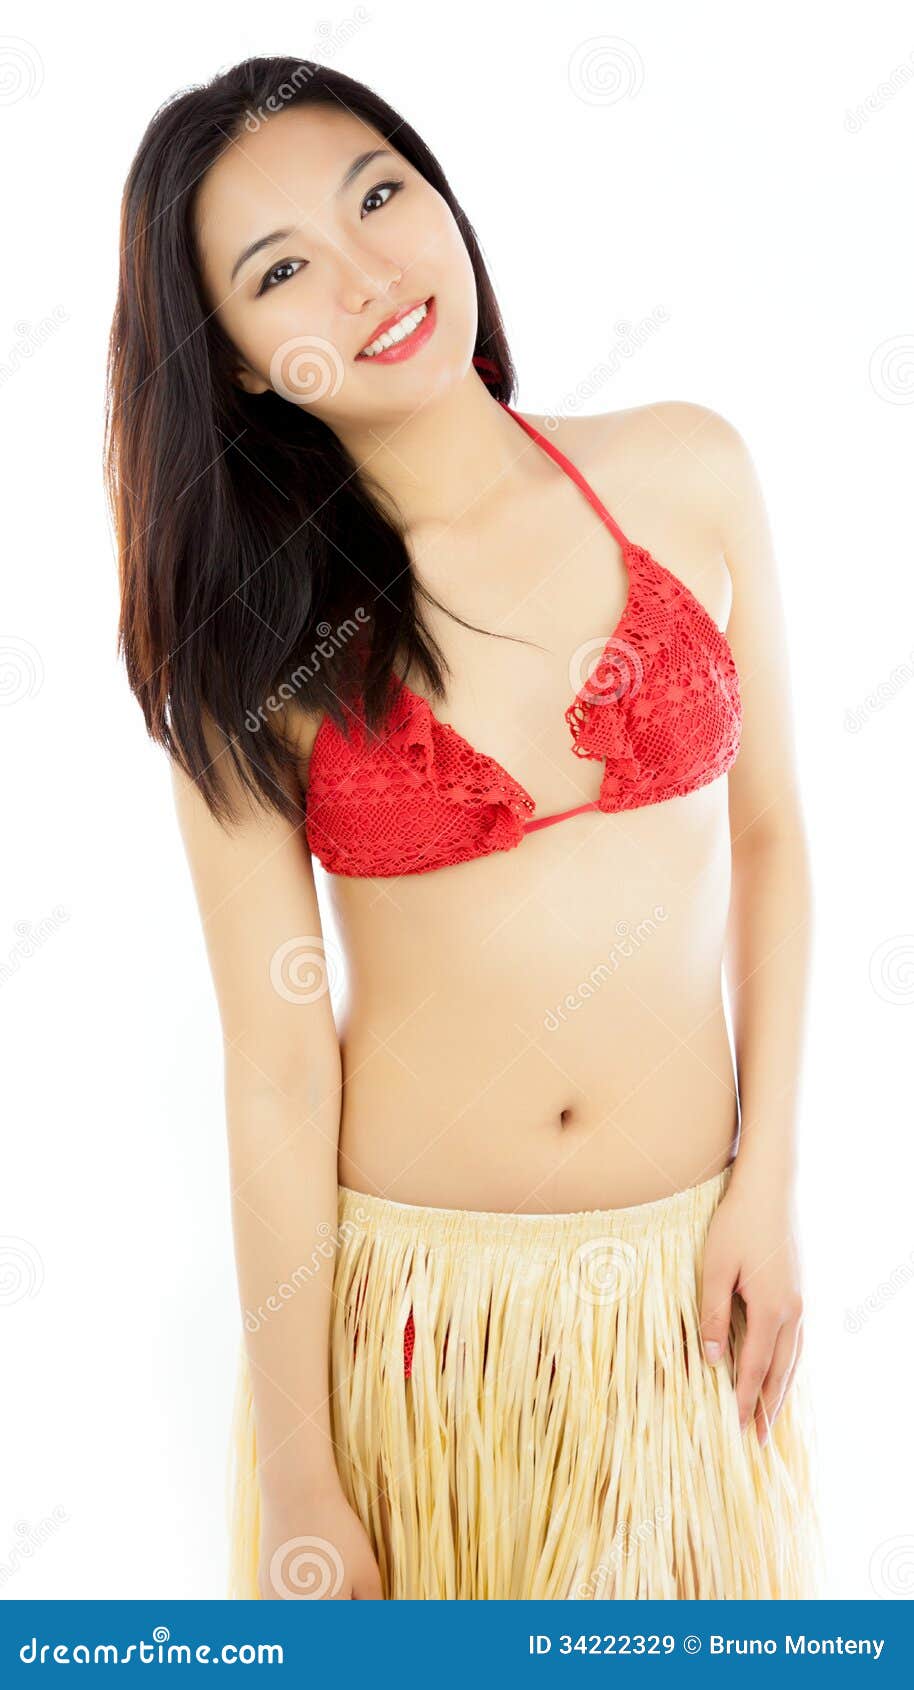 Attractive Asian Girl 20 Years Old Shot in Studio Stock Image picture